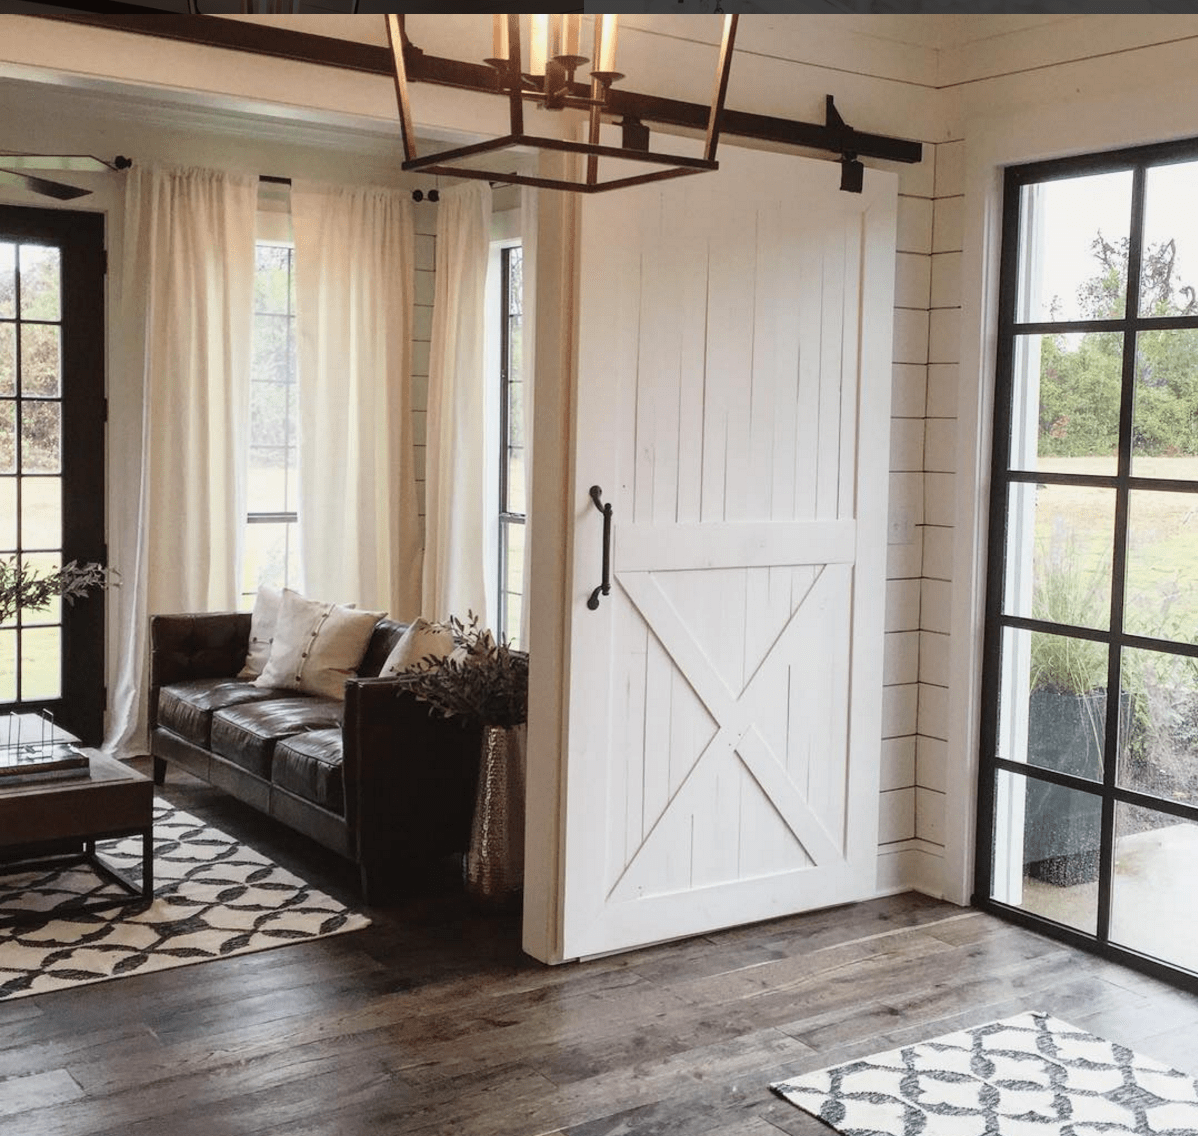 “Fixer Upper” Country-Chic Style by Joanna Gaines